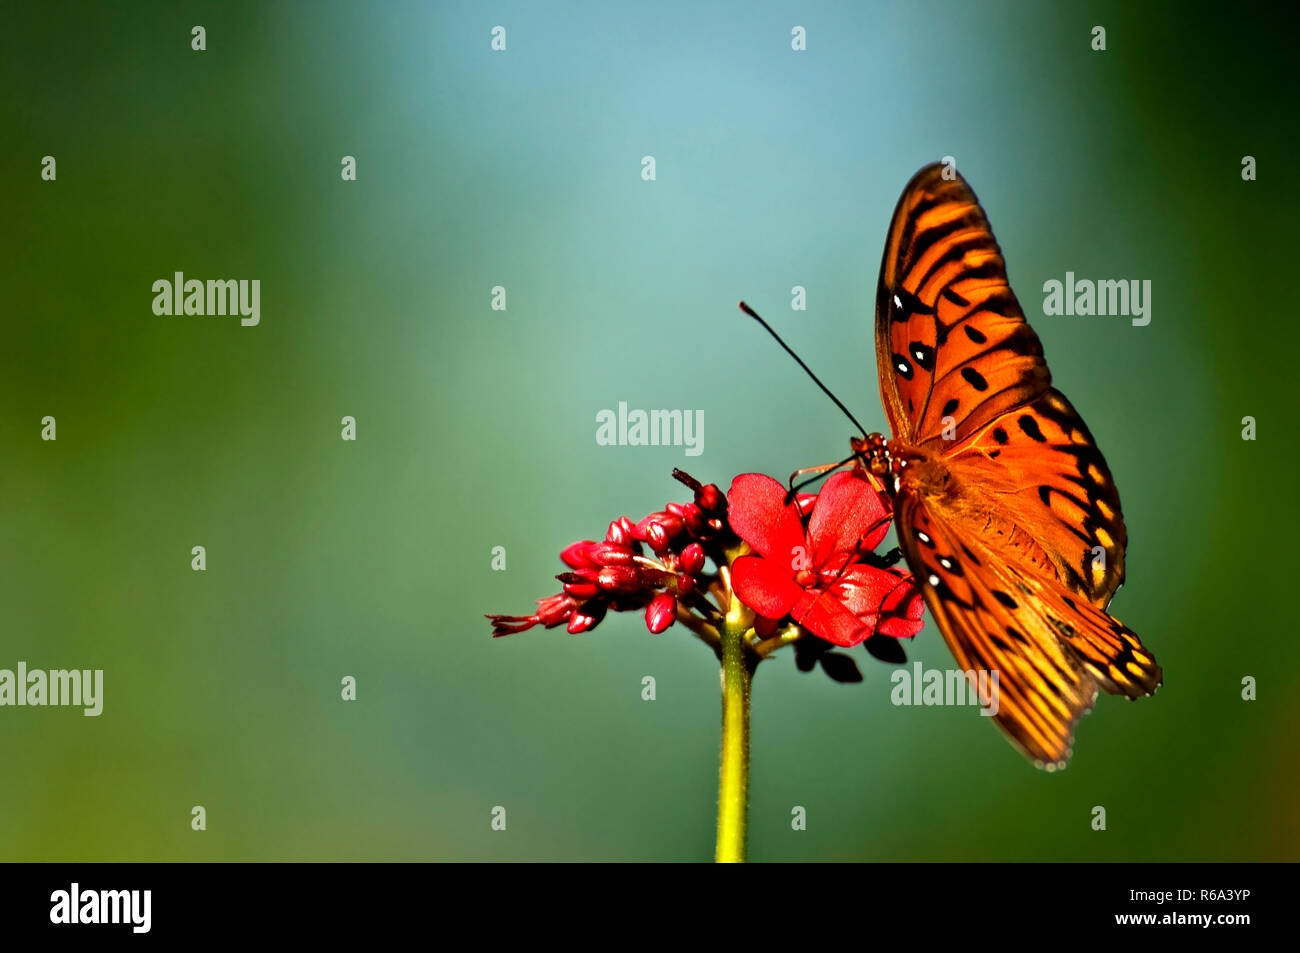 An orange, white and black gulf fritillary (Agraulis vanillae) butterfly perched on a red jatropha bloom with a soft green background. Stock Photo